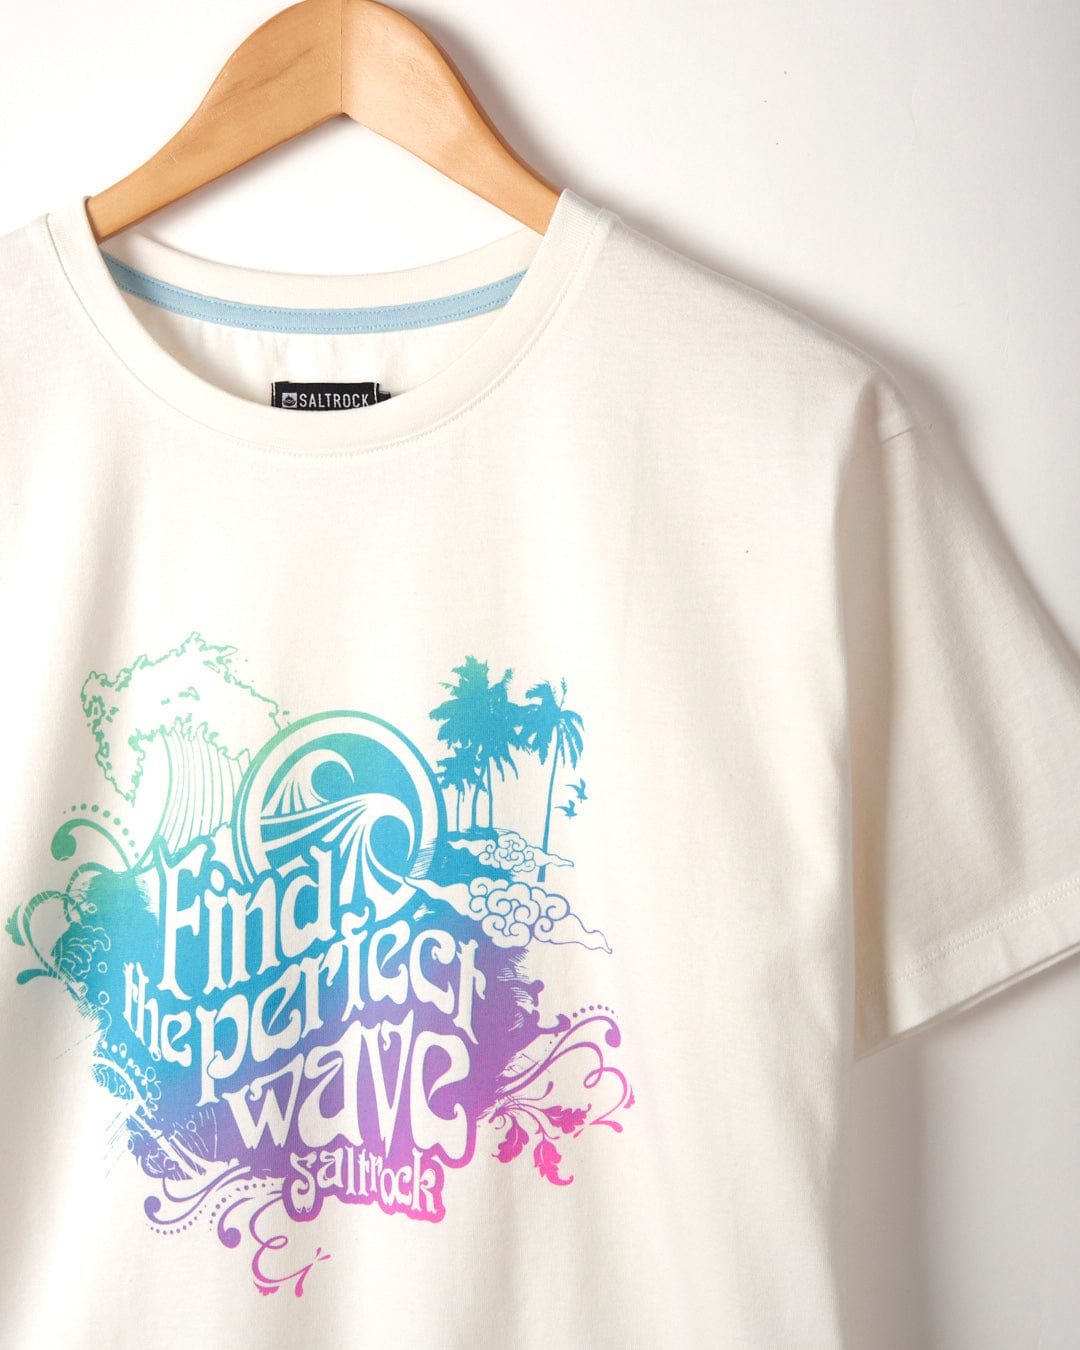 White "Find The Perfect Wave" Womens Short Sleeve T-Shirt by Saltrock hanging on a wooden hanger against a plain background.